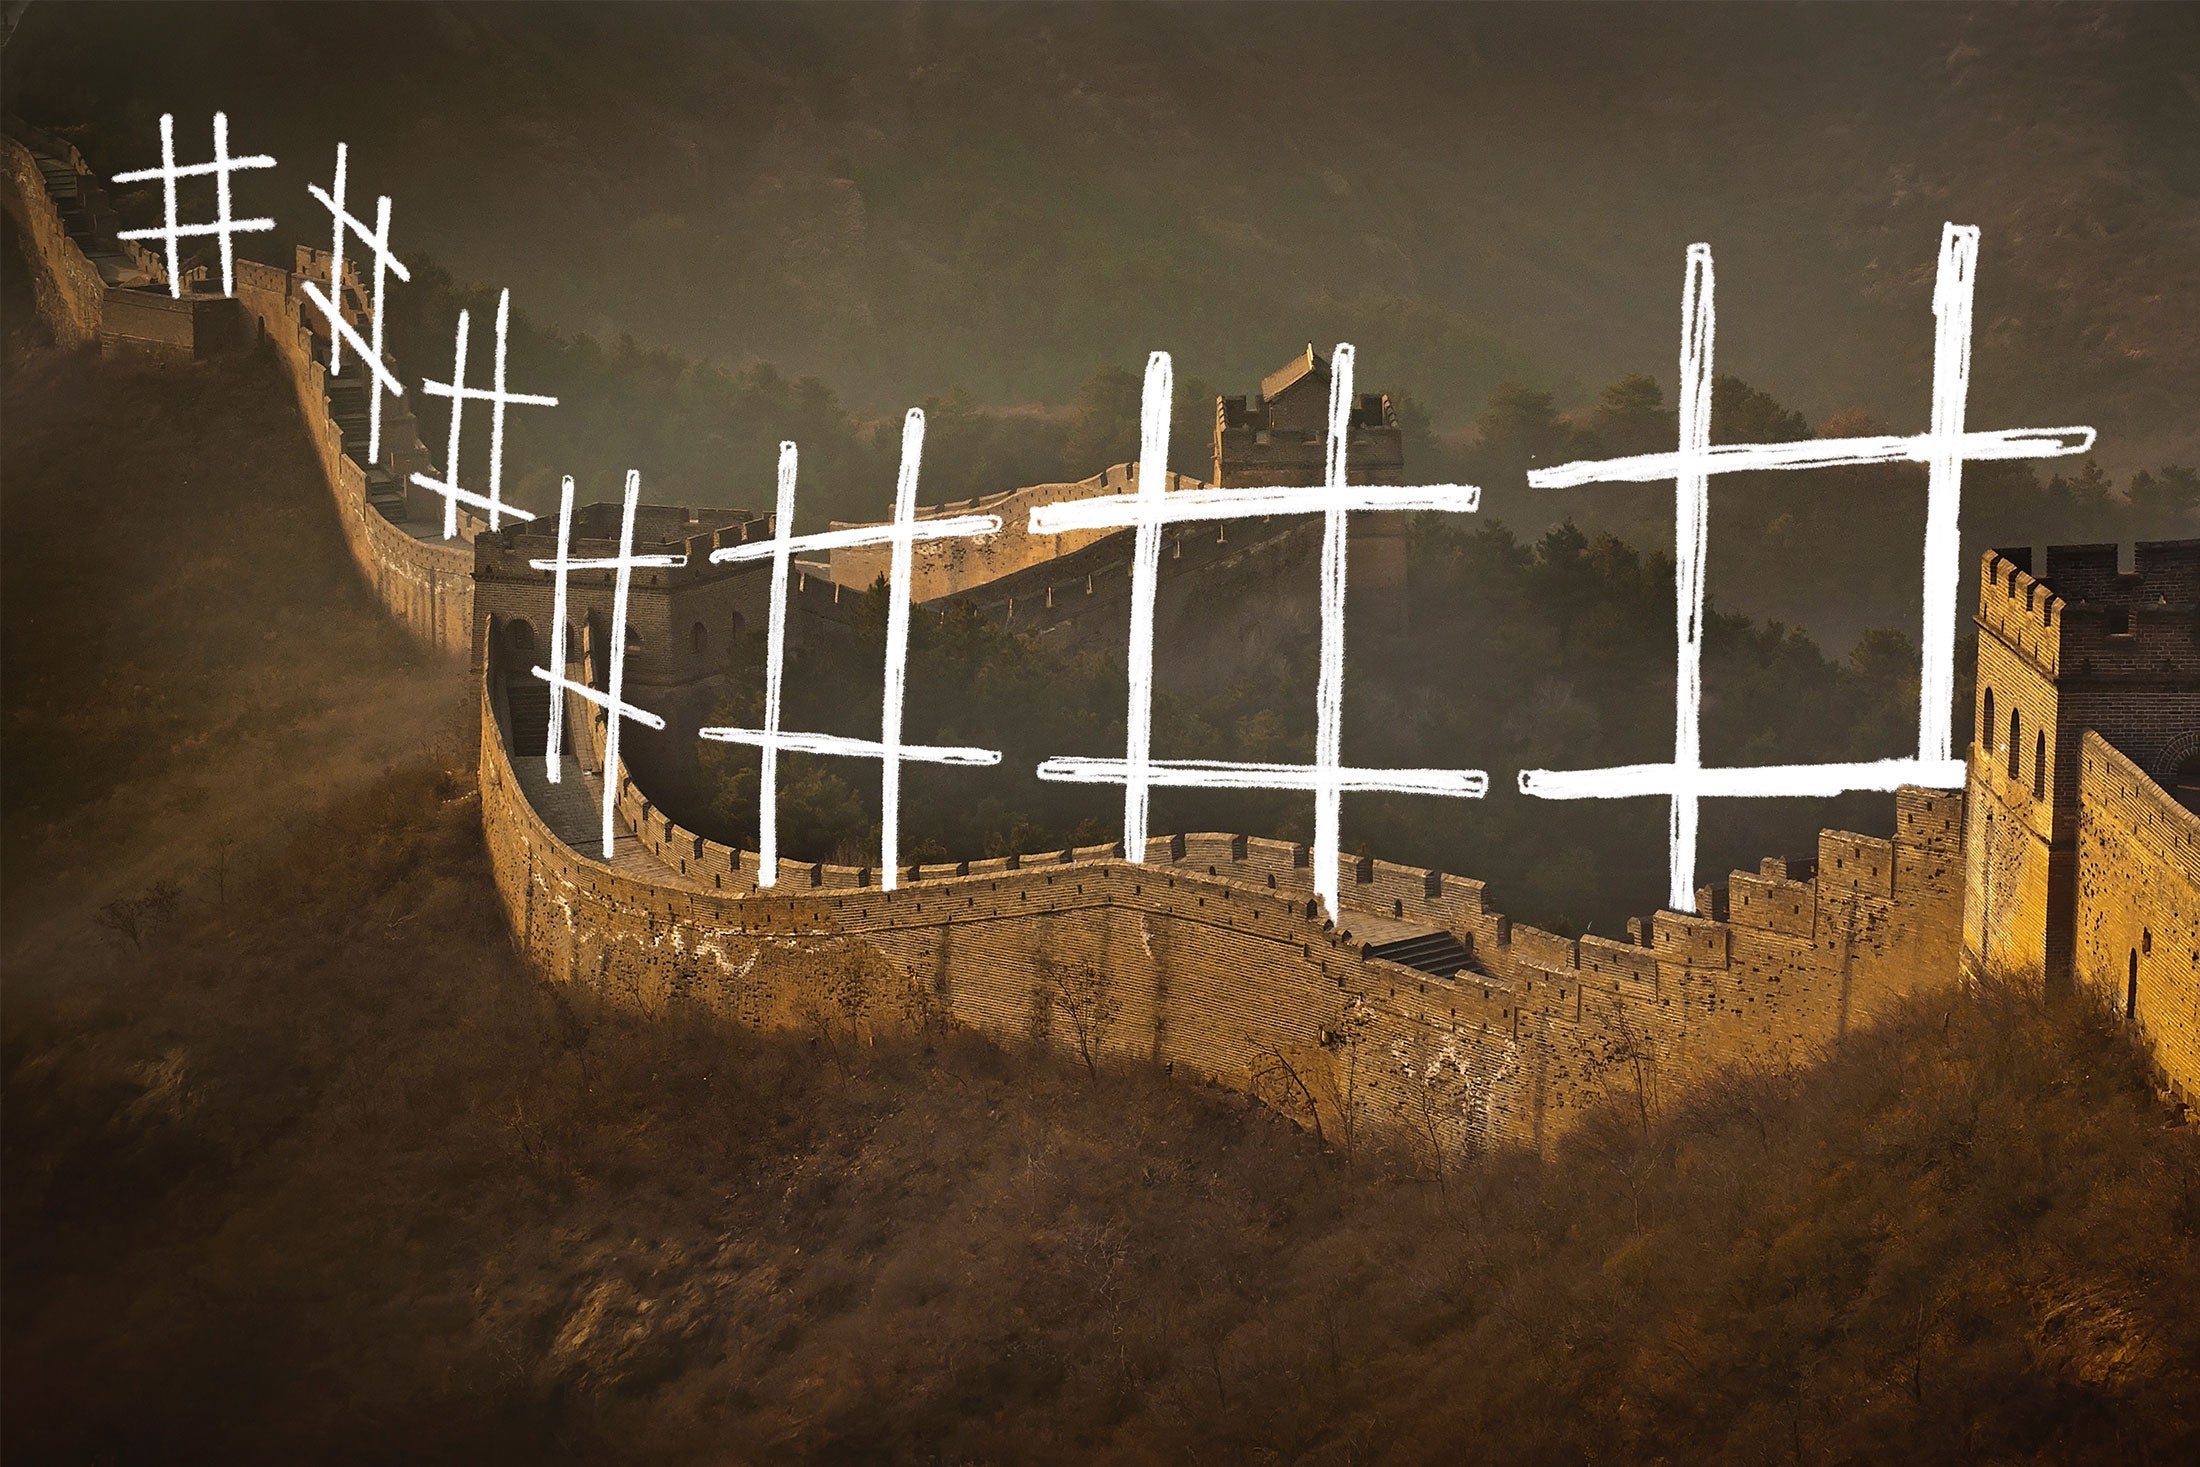 The Great Wall of China superimposed with #### code.